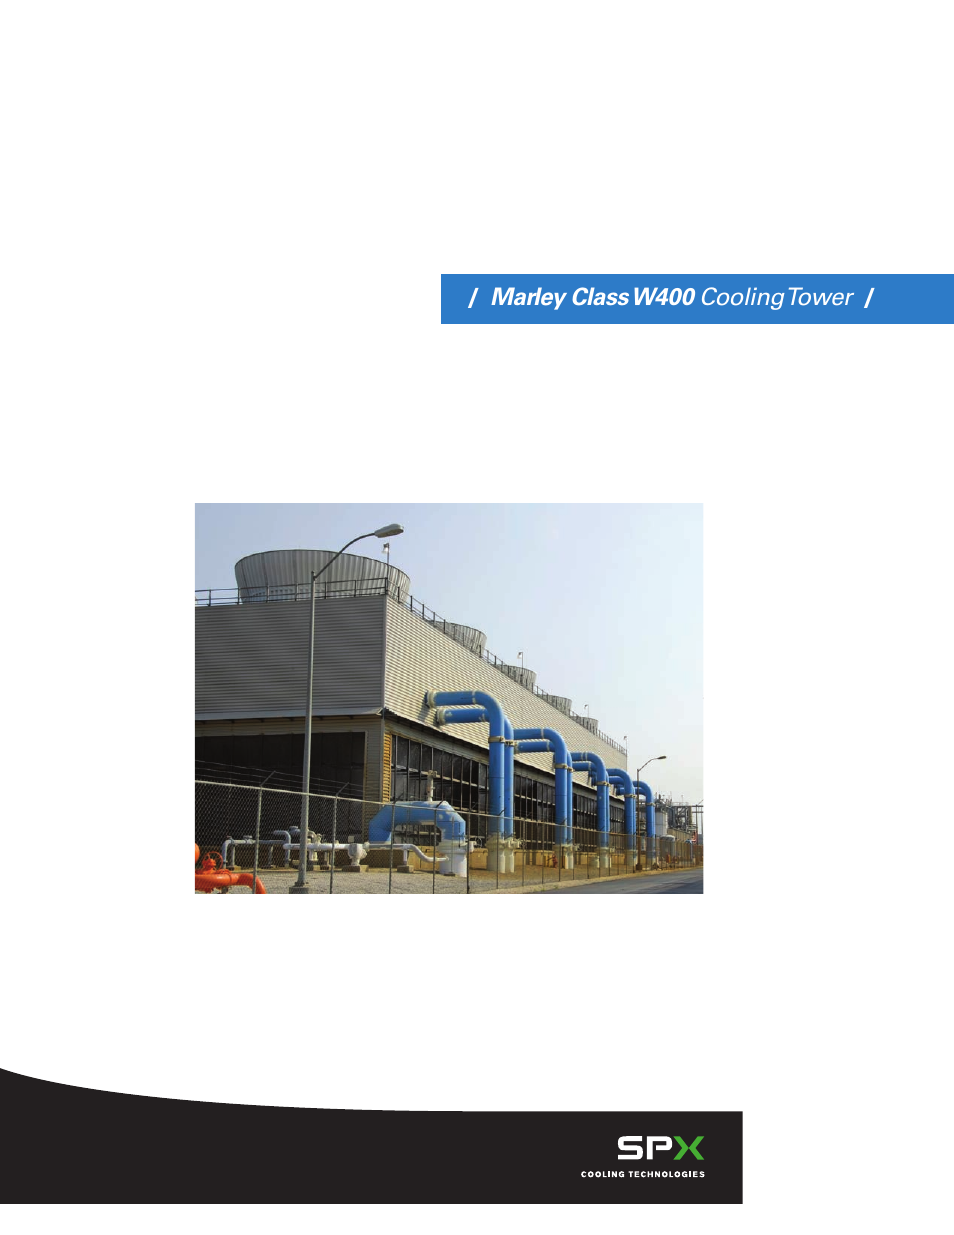 Cooling Tower W400